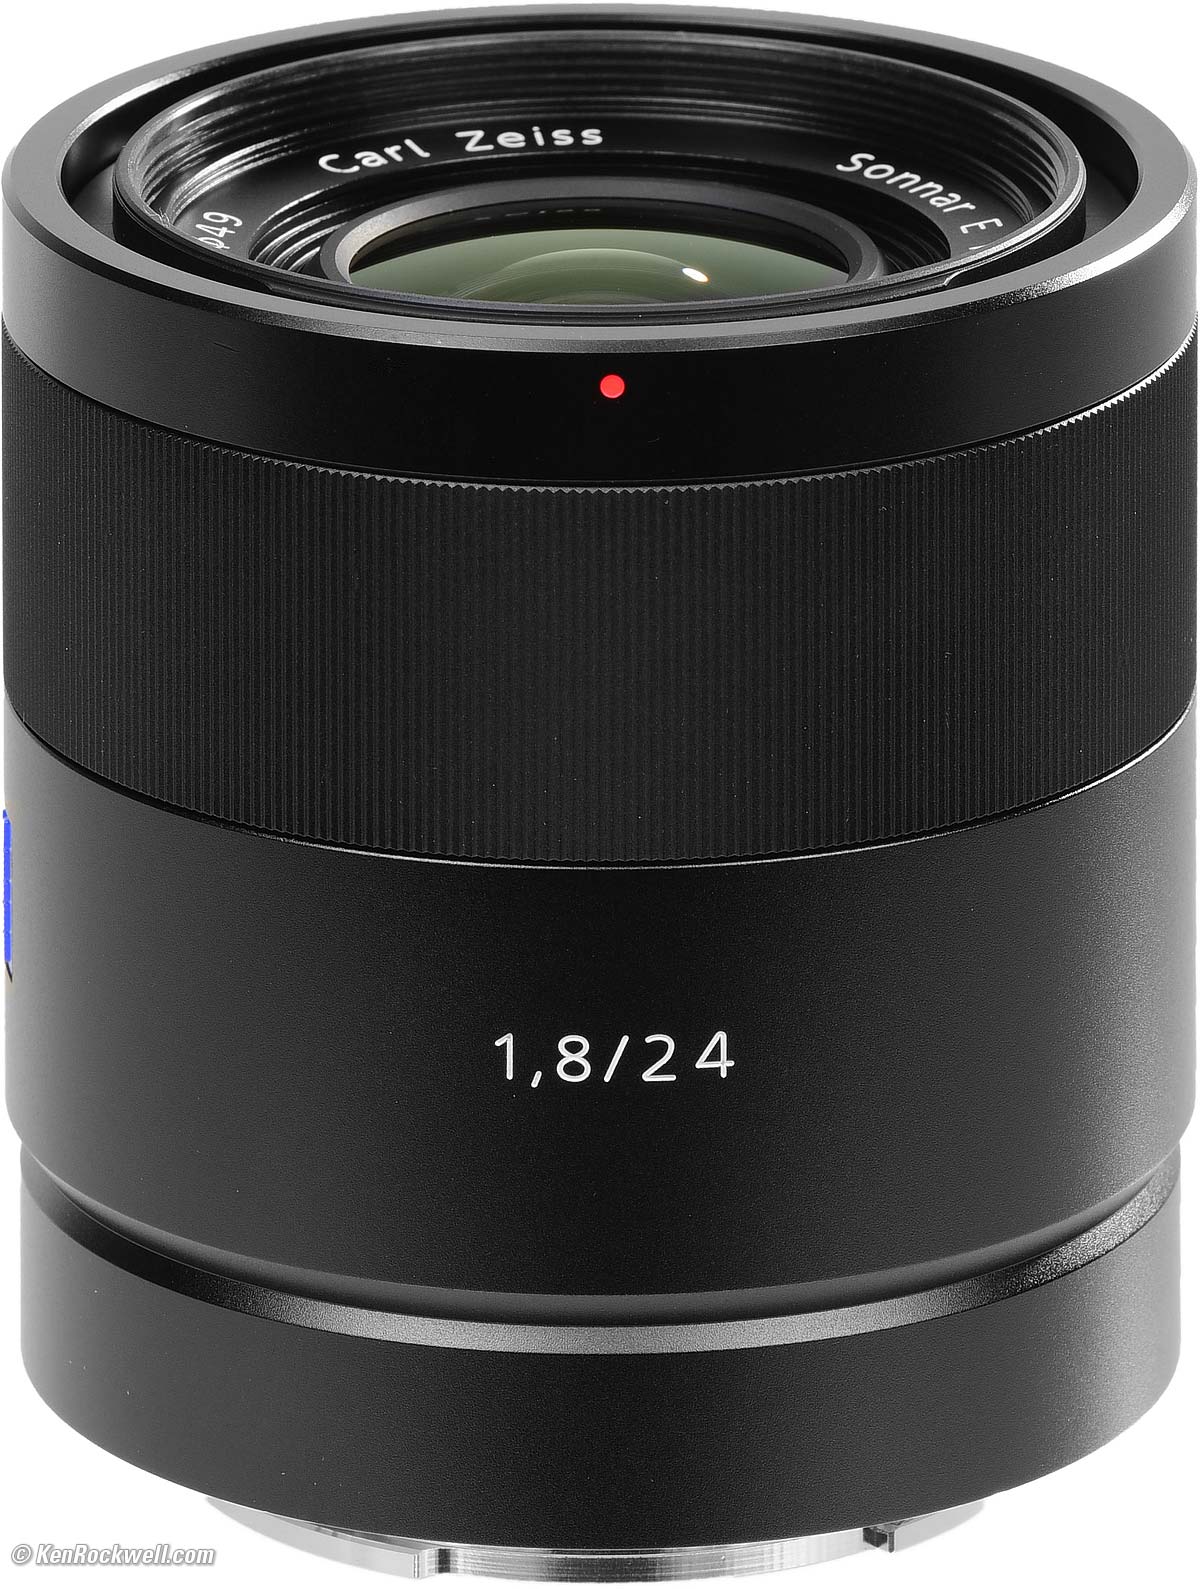 Decompose Skim Premature Sony Zeiss 24mm f/1.8 Review